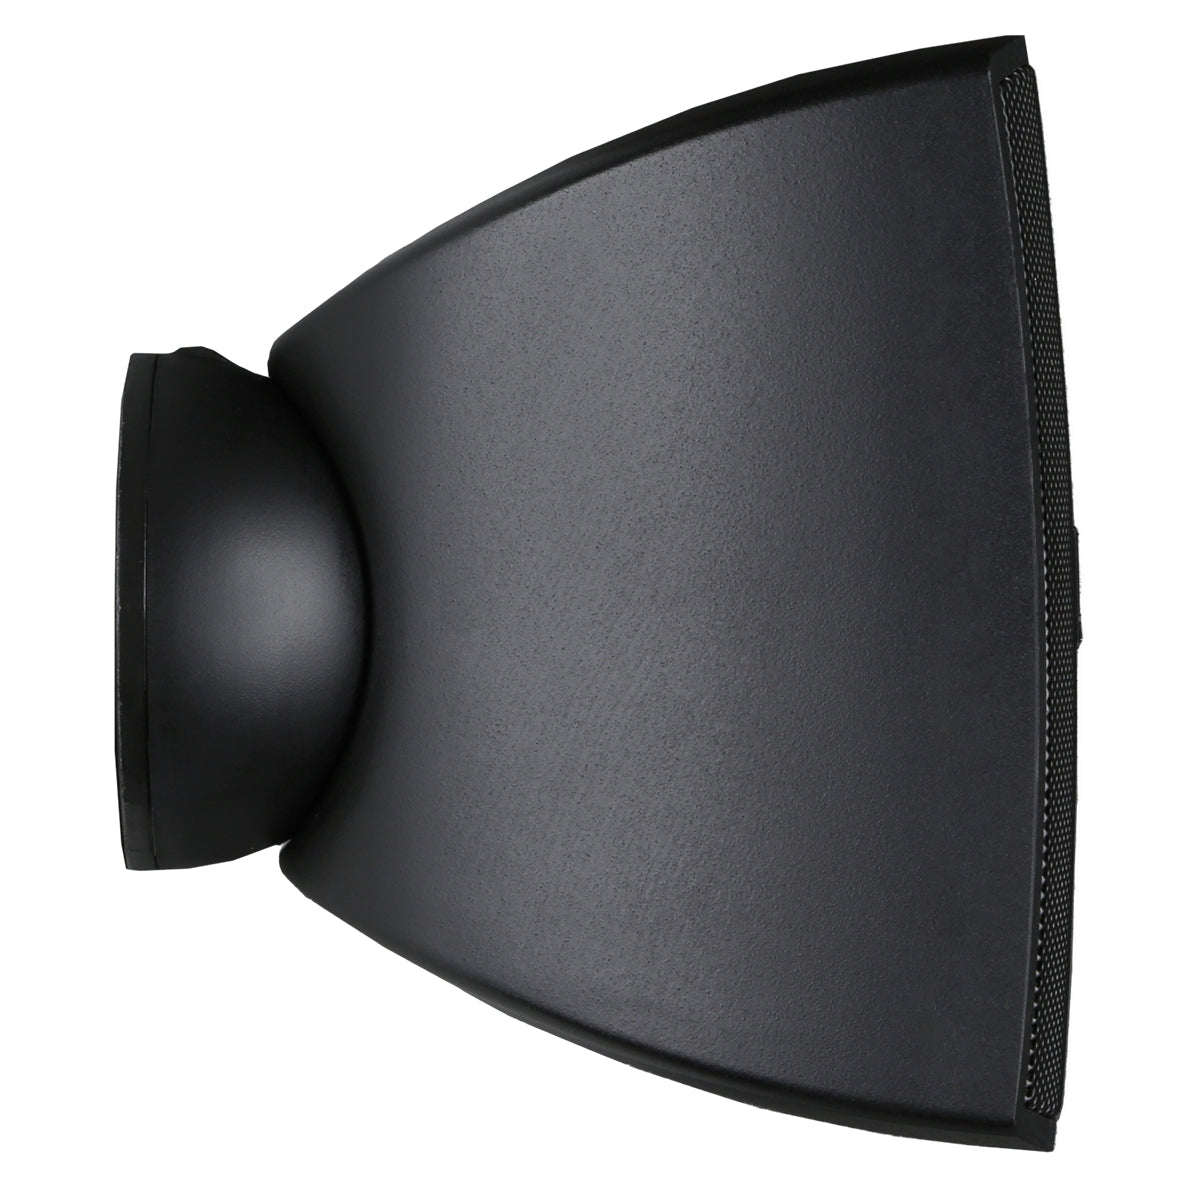 Audac ATEO2D Compact wall speaker with CleverMount 2" Black version - 16ohm